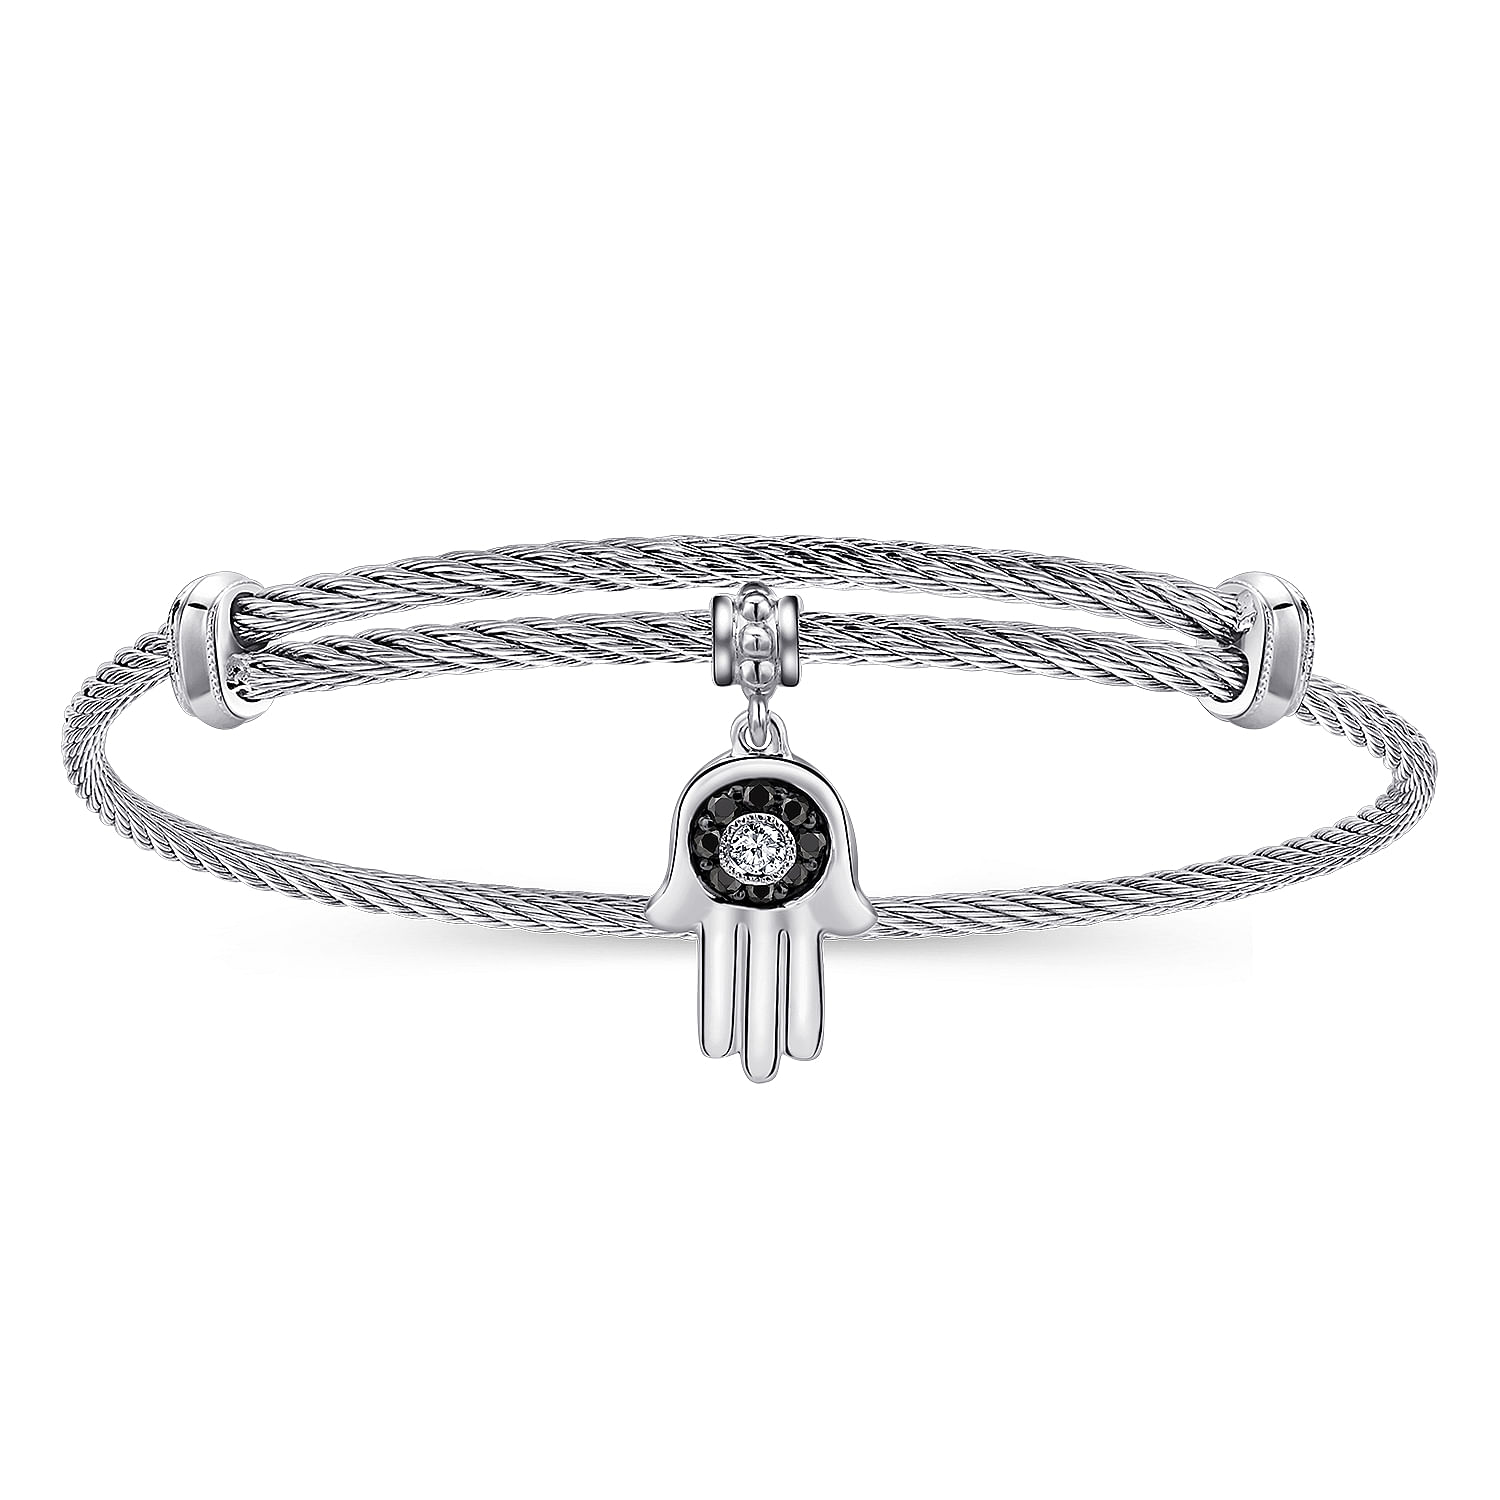 Adjustable Stainless Steel Bangle with Silver Black Spinel and White Sapphire Hamsa Charm